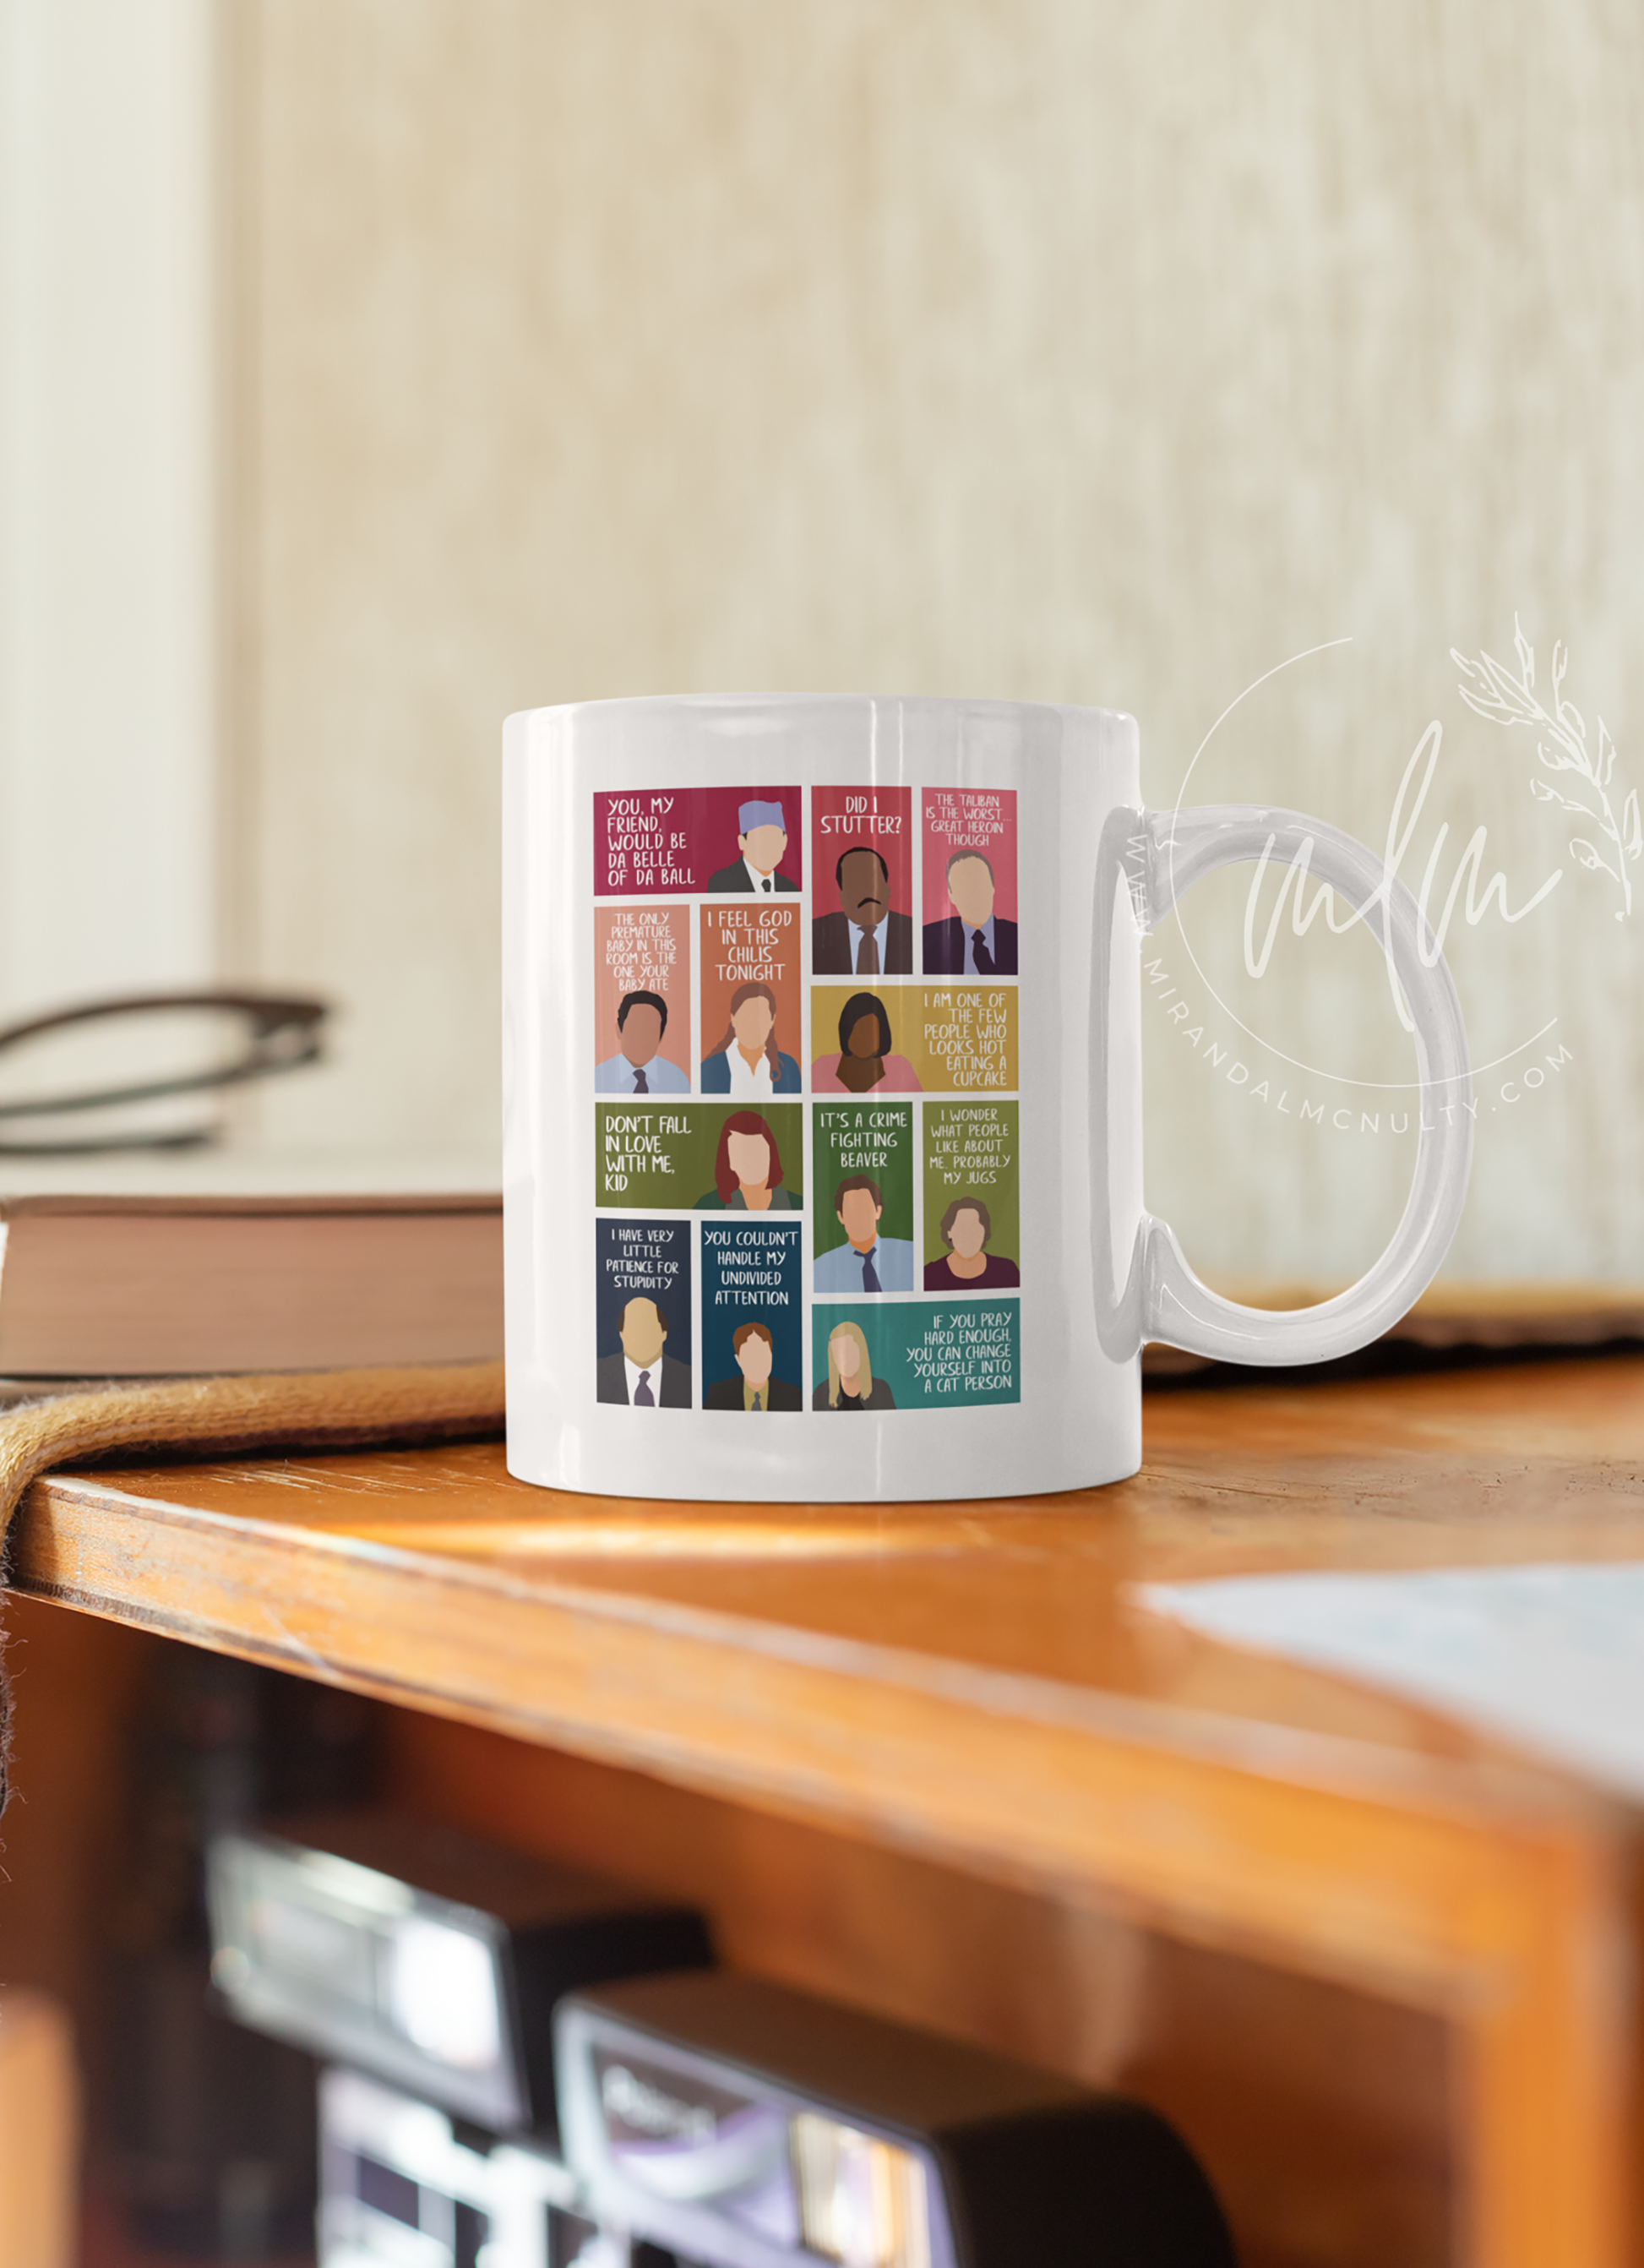 unique and funny mug inspired by the TV show, The Office